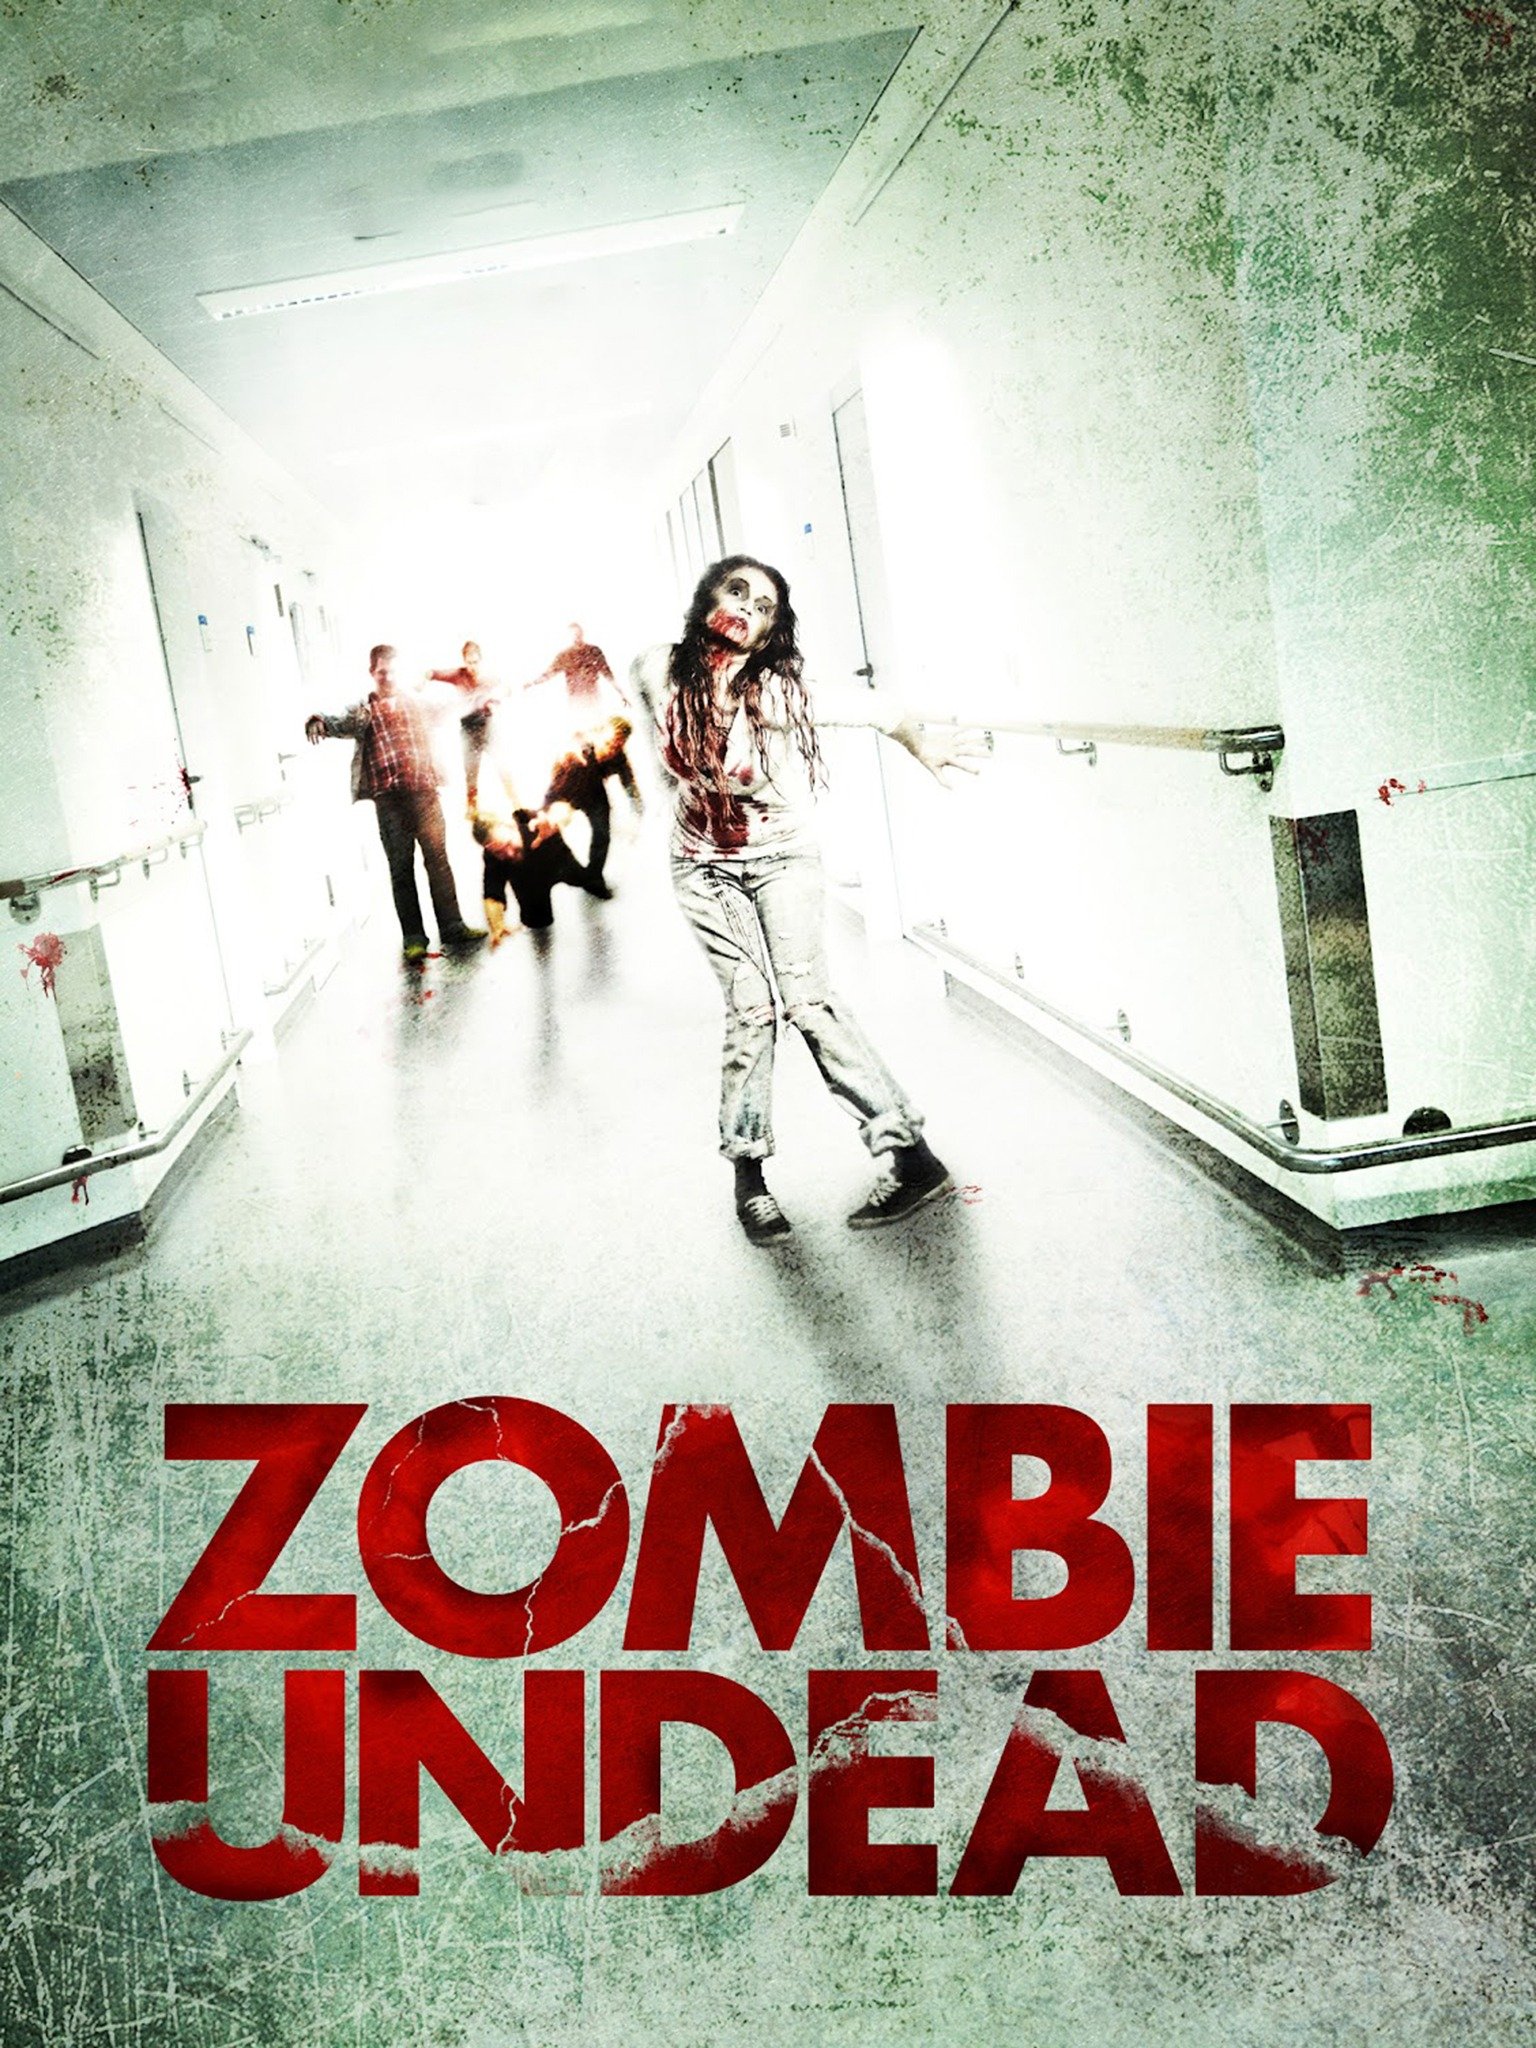 Zombie Undead 2010 Rotten Tomatoes 6139